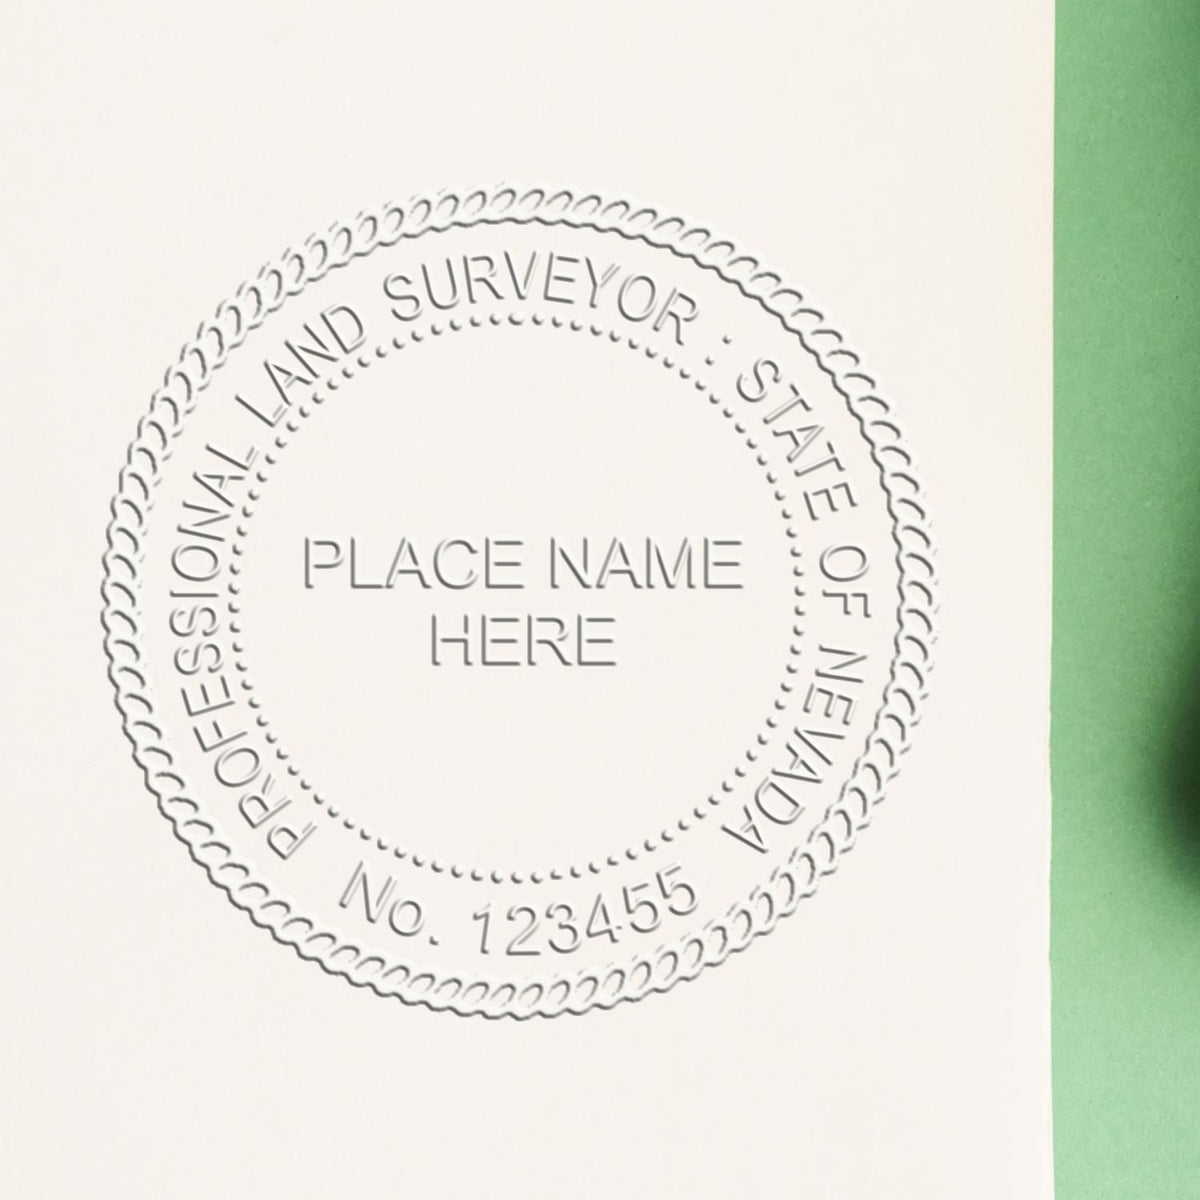 A stamped impression of the Handheld Nevada Land Surveyor Seal in this stylish lifestyle photo, setting the tone for a unique and personalized product.